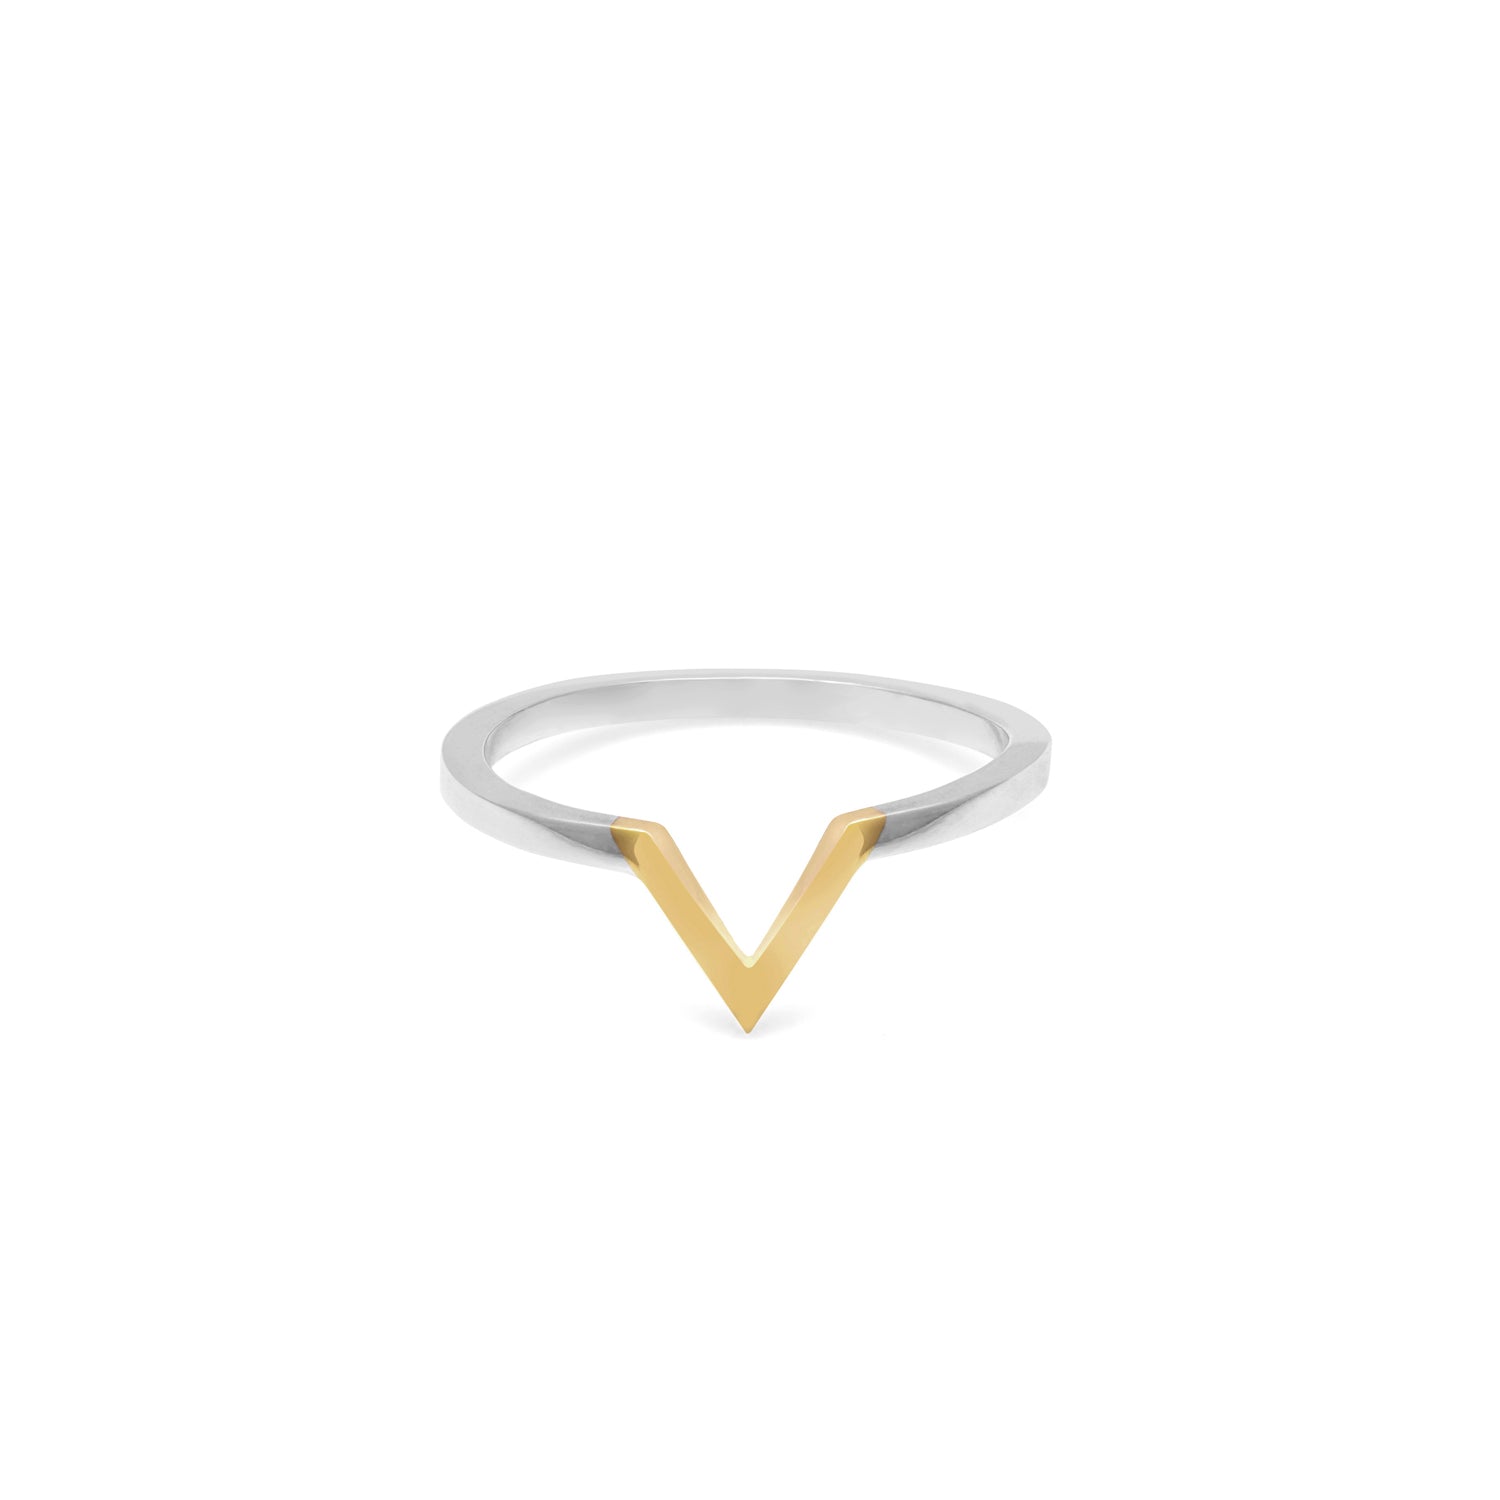 Two-tone Triangle Ring - 9k Yellow & White Gold - Myia Bonner Jewellery